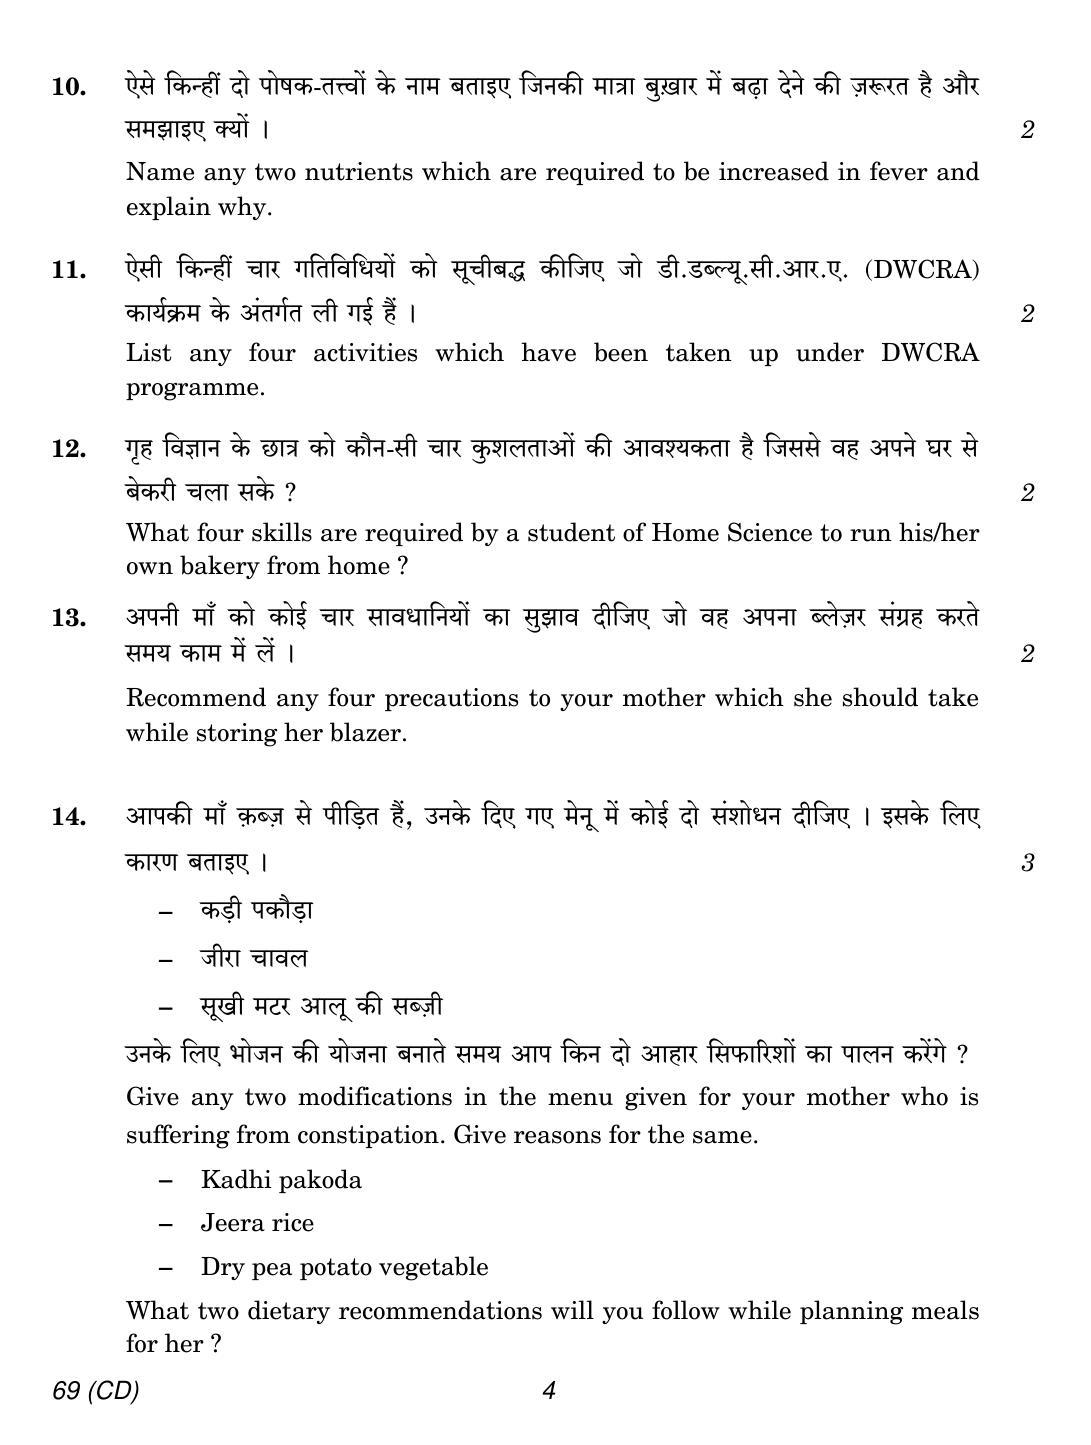 CBSE Class 12 69 HOME SCIENCE CD 2018 Question Paper - Page 4